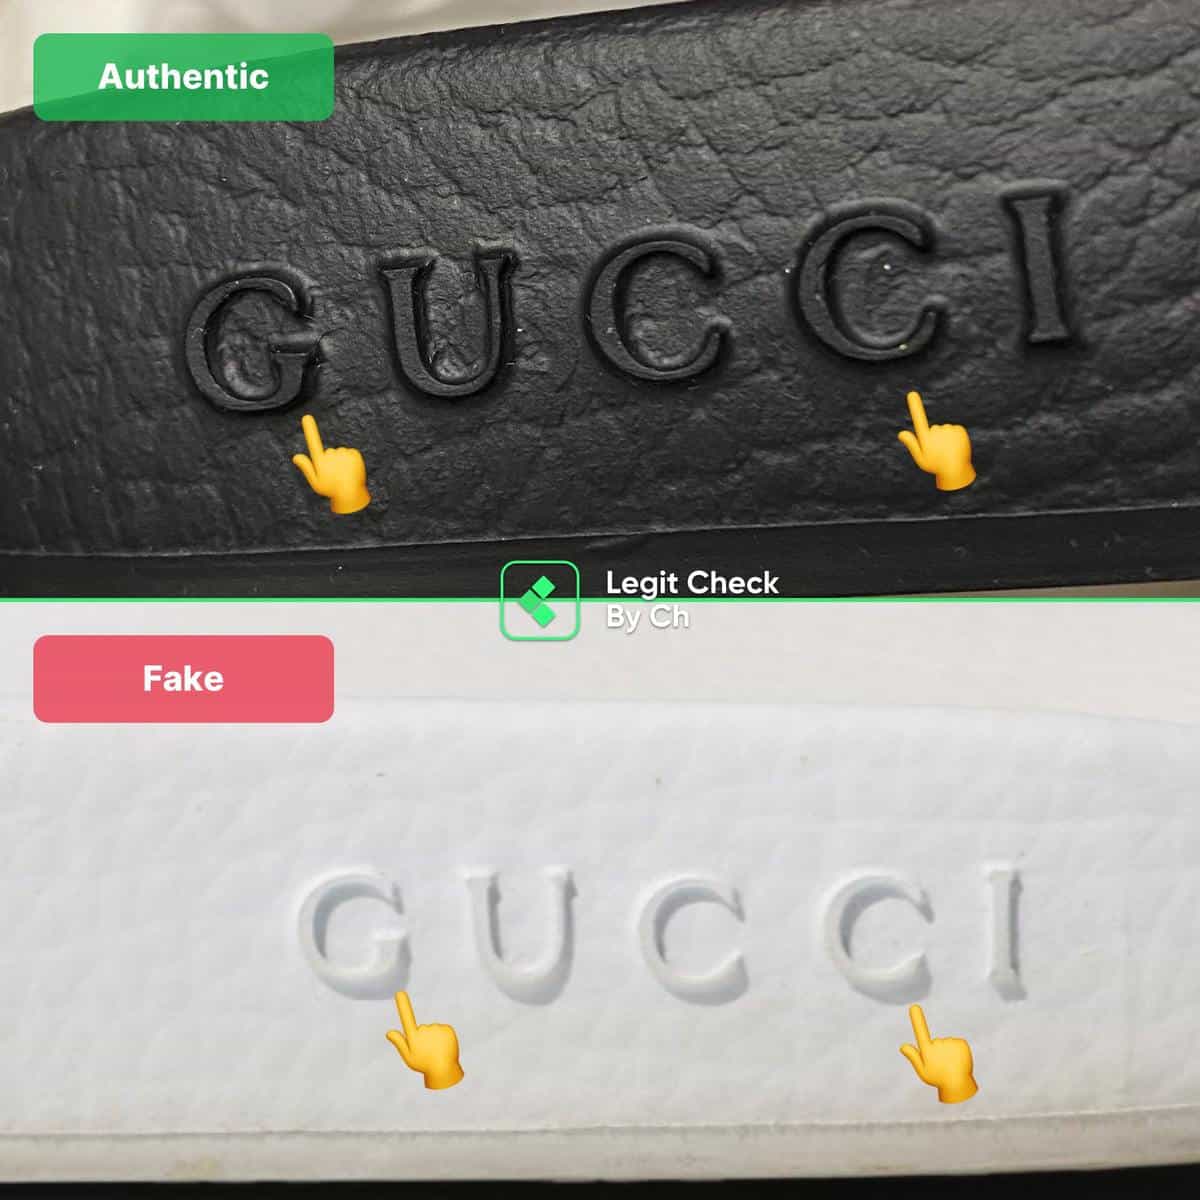 Is this Gucci real